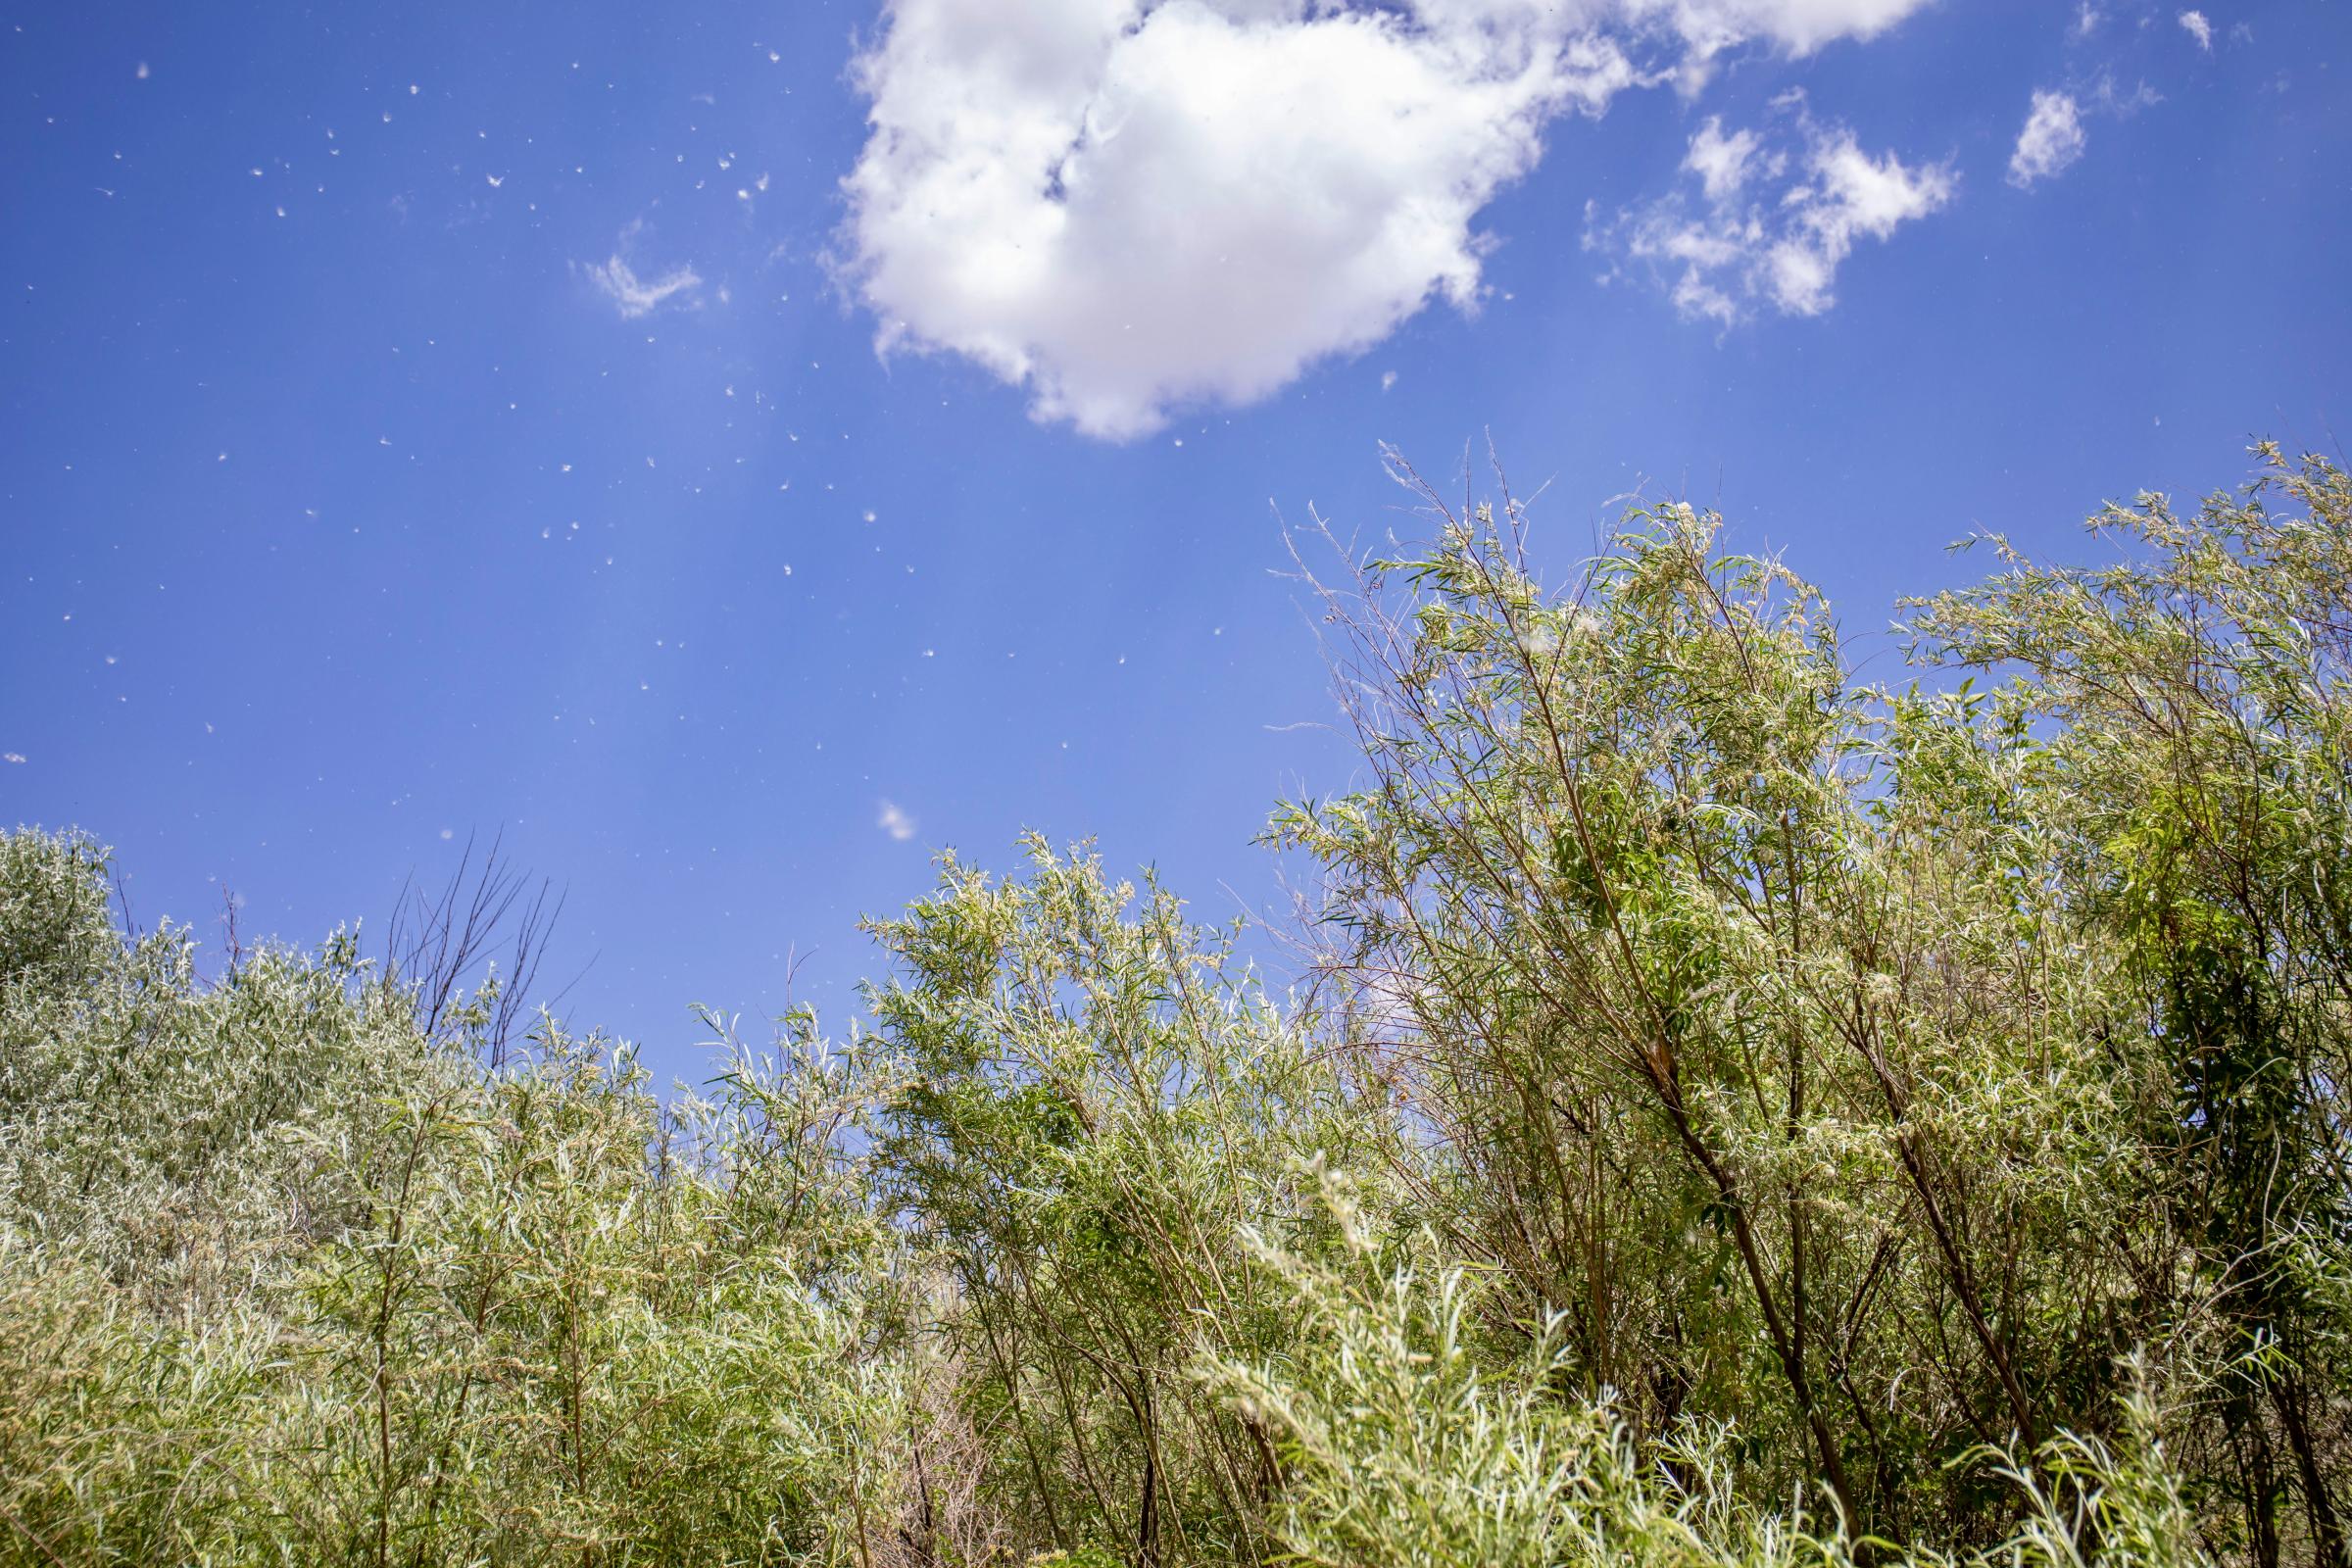 Crisis on the Rio Grande - Cottonwood seeds float across the air, borne aloft on summer winds. (Photo by Diana Cervantes for...